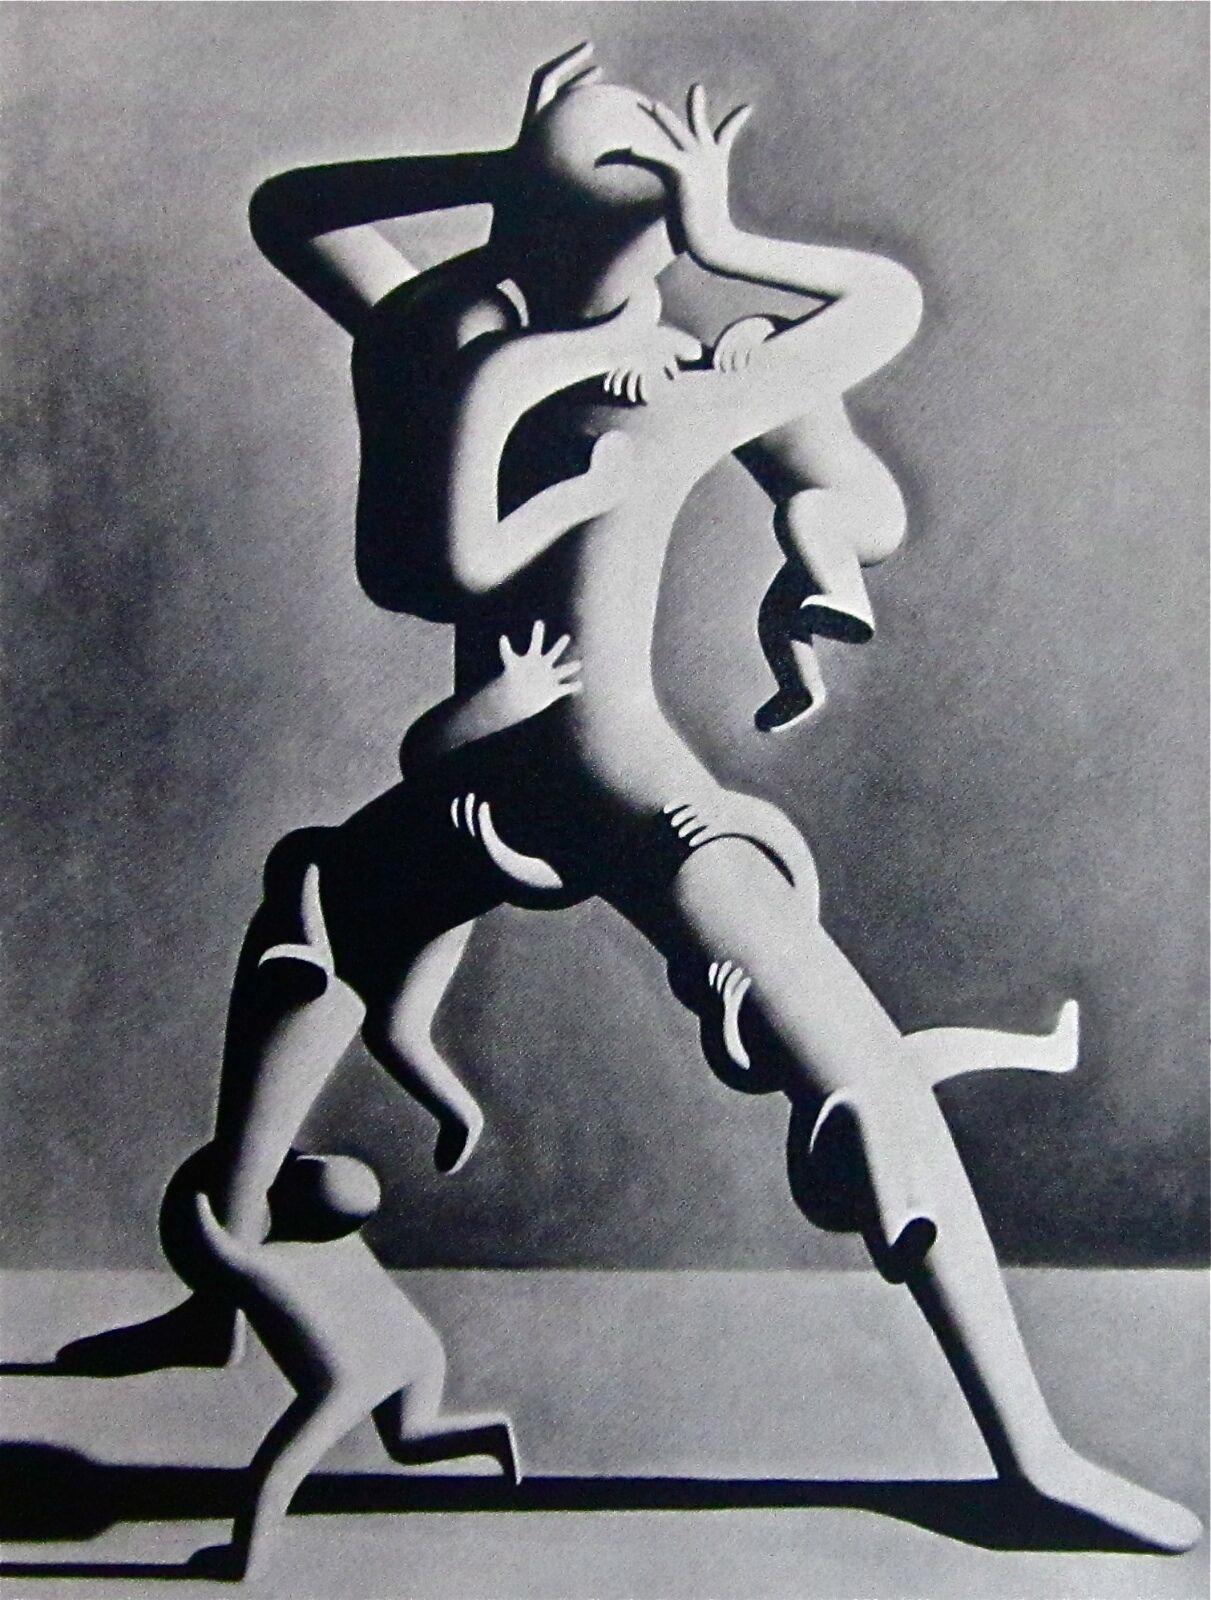 MARK KOSTABI (1960-  ) Born in California, Mark Kostabi has lived, worked and made waves in New York since 1982. Artist, author, and composer, Kostabi has been featured in titles including 60 Minutes, The Oprah Winfrey Show, Forbes, The New York